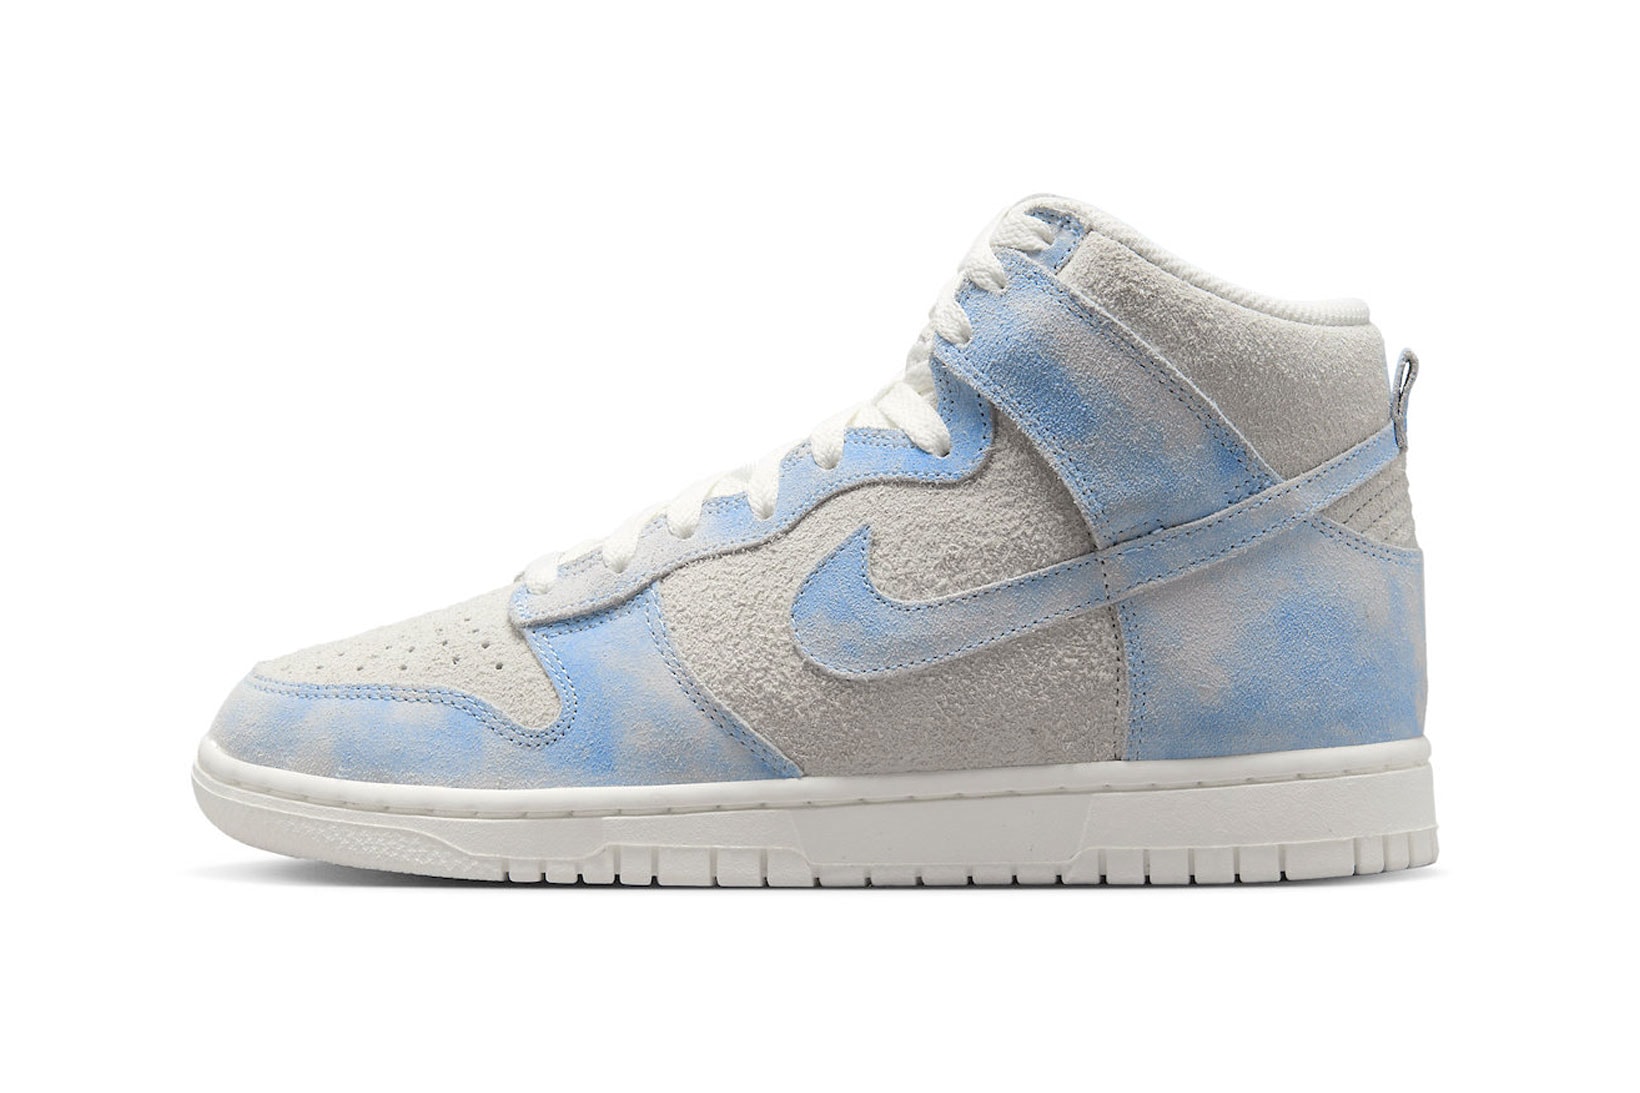 Nike Dunk High "Clouds" Images, University Blue Sail Release Date Info